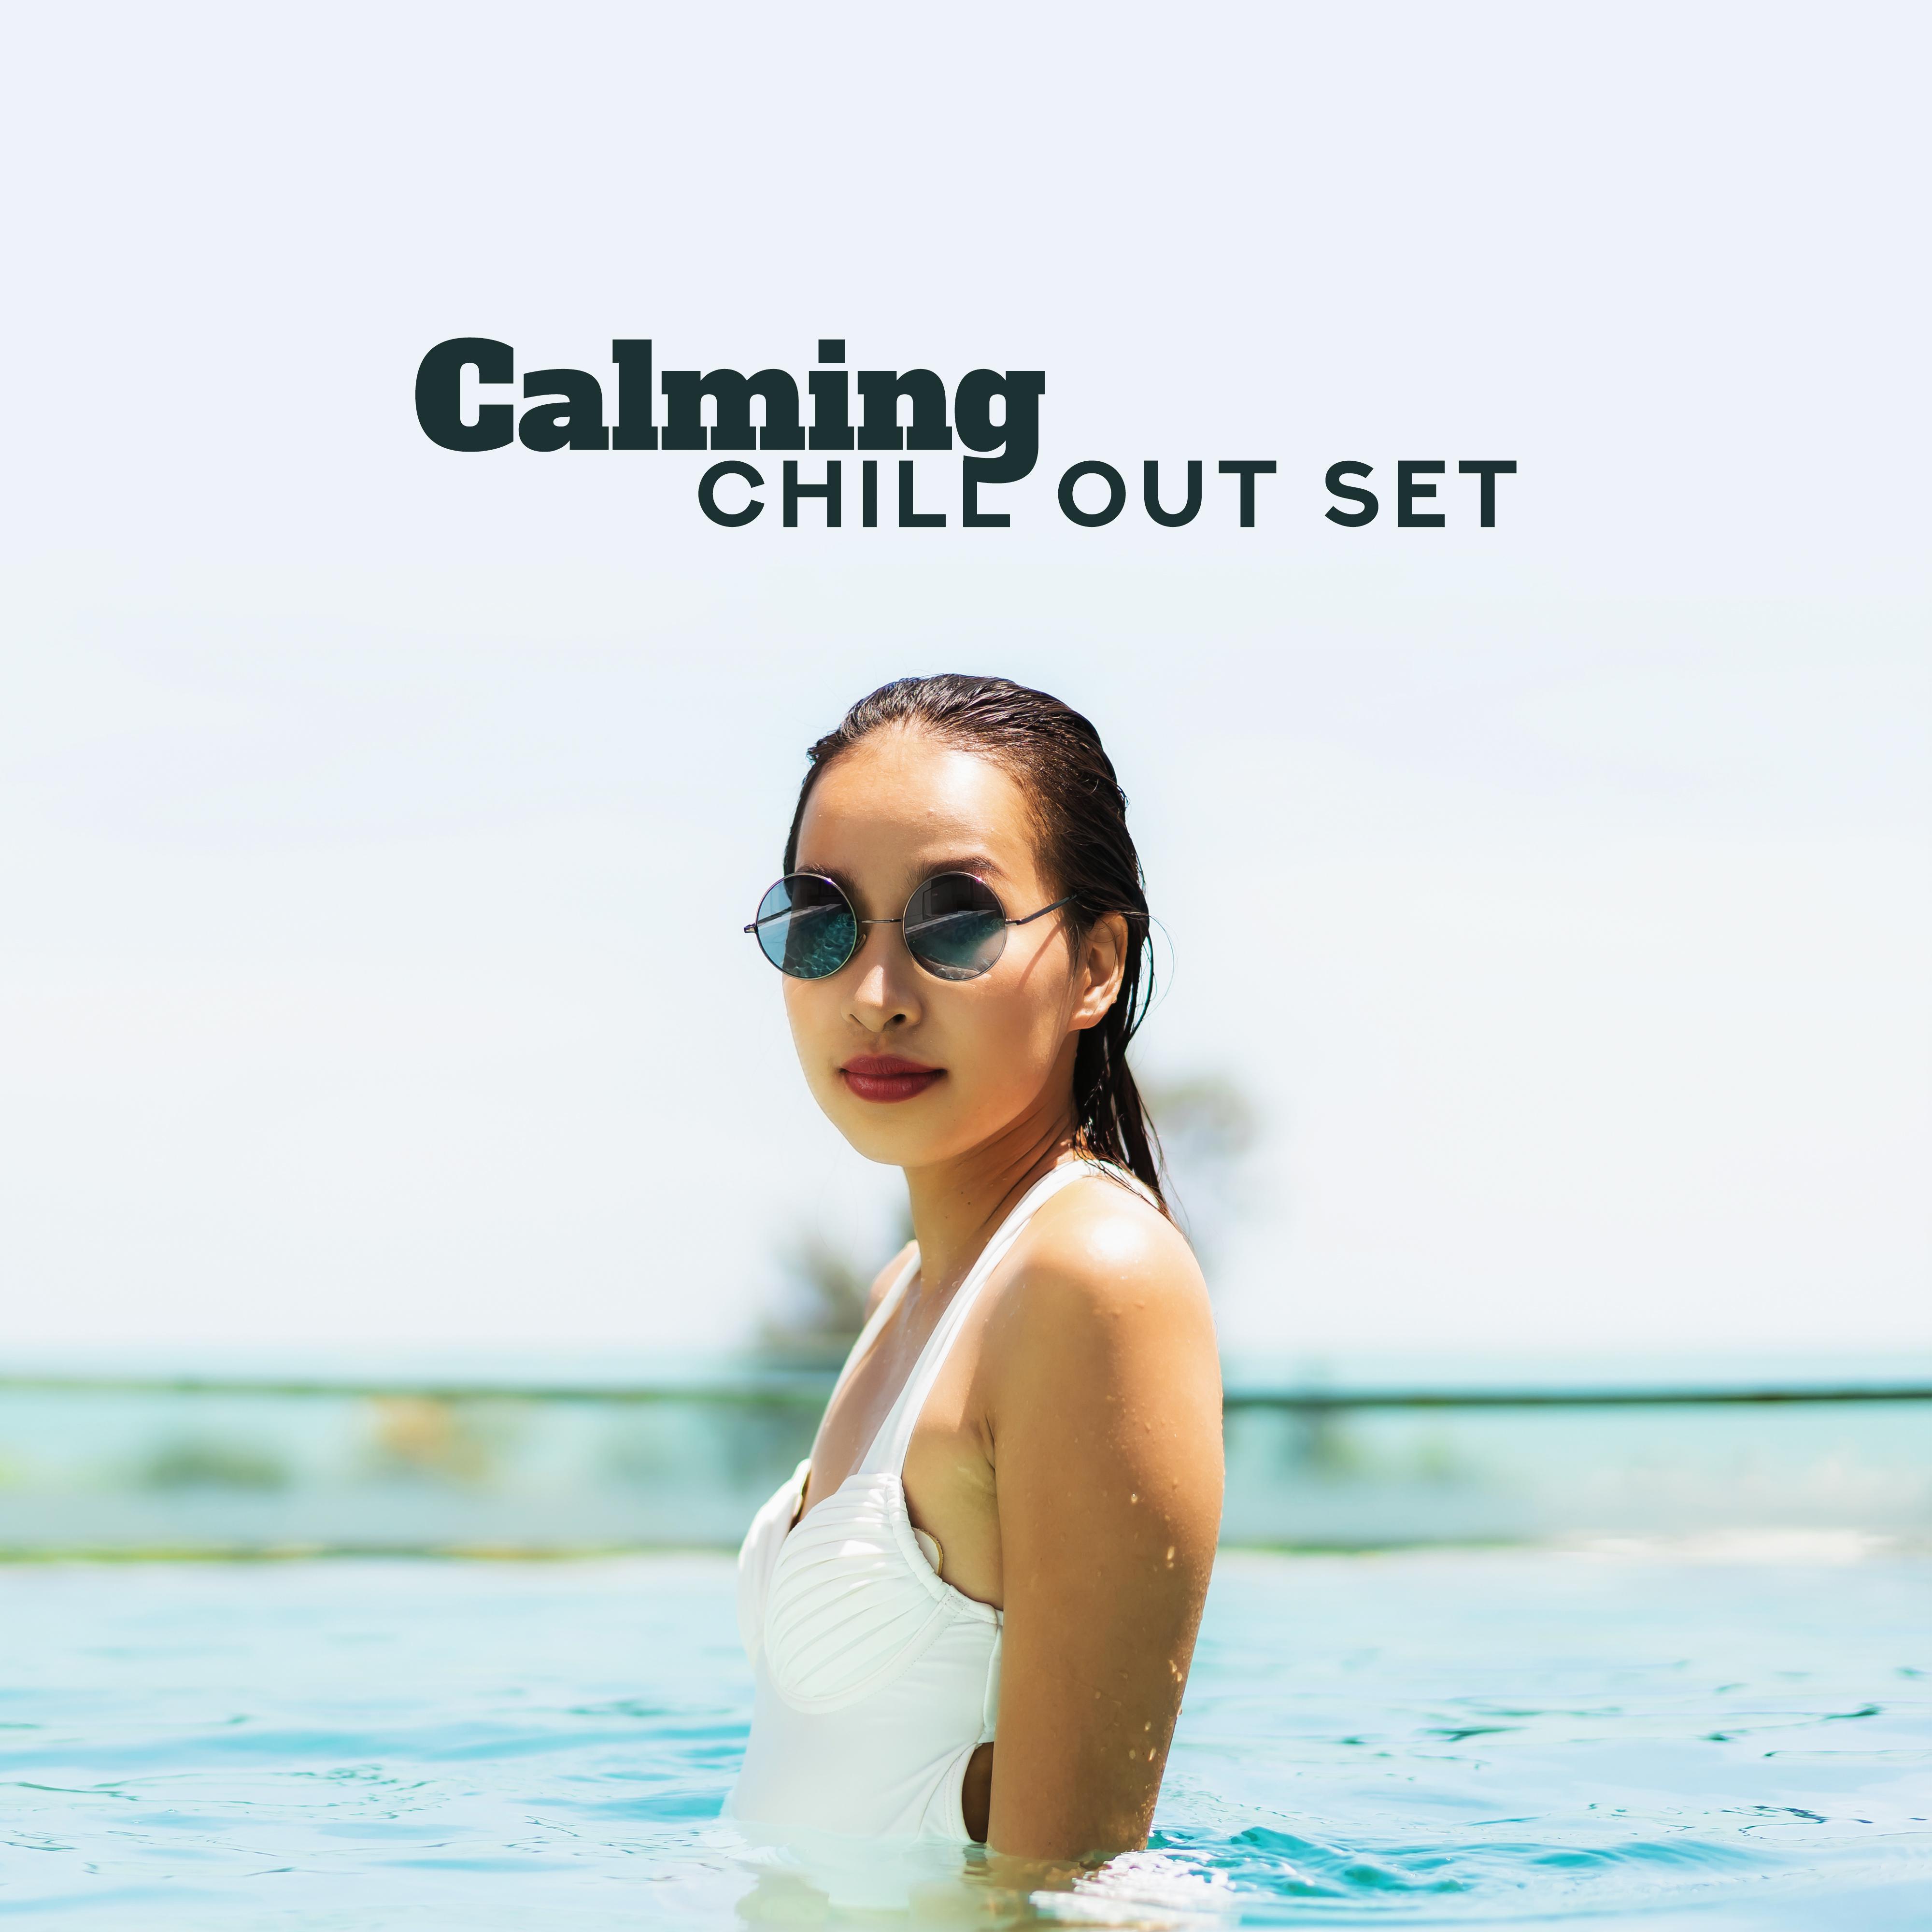 Calming Chill Out Set - Calm Down, Rest and Relax with the Best Soothing Chillout Music